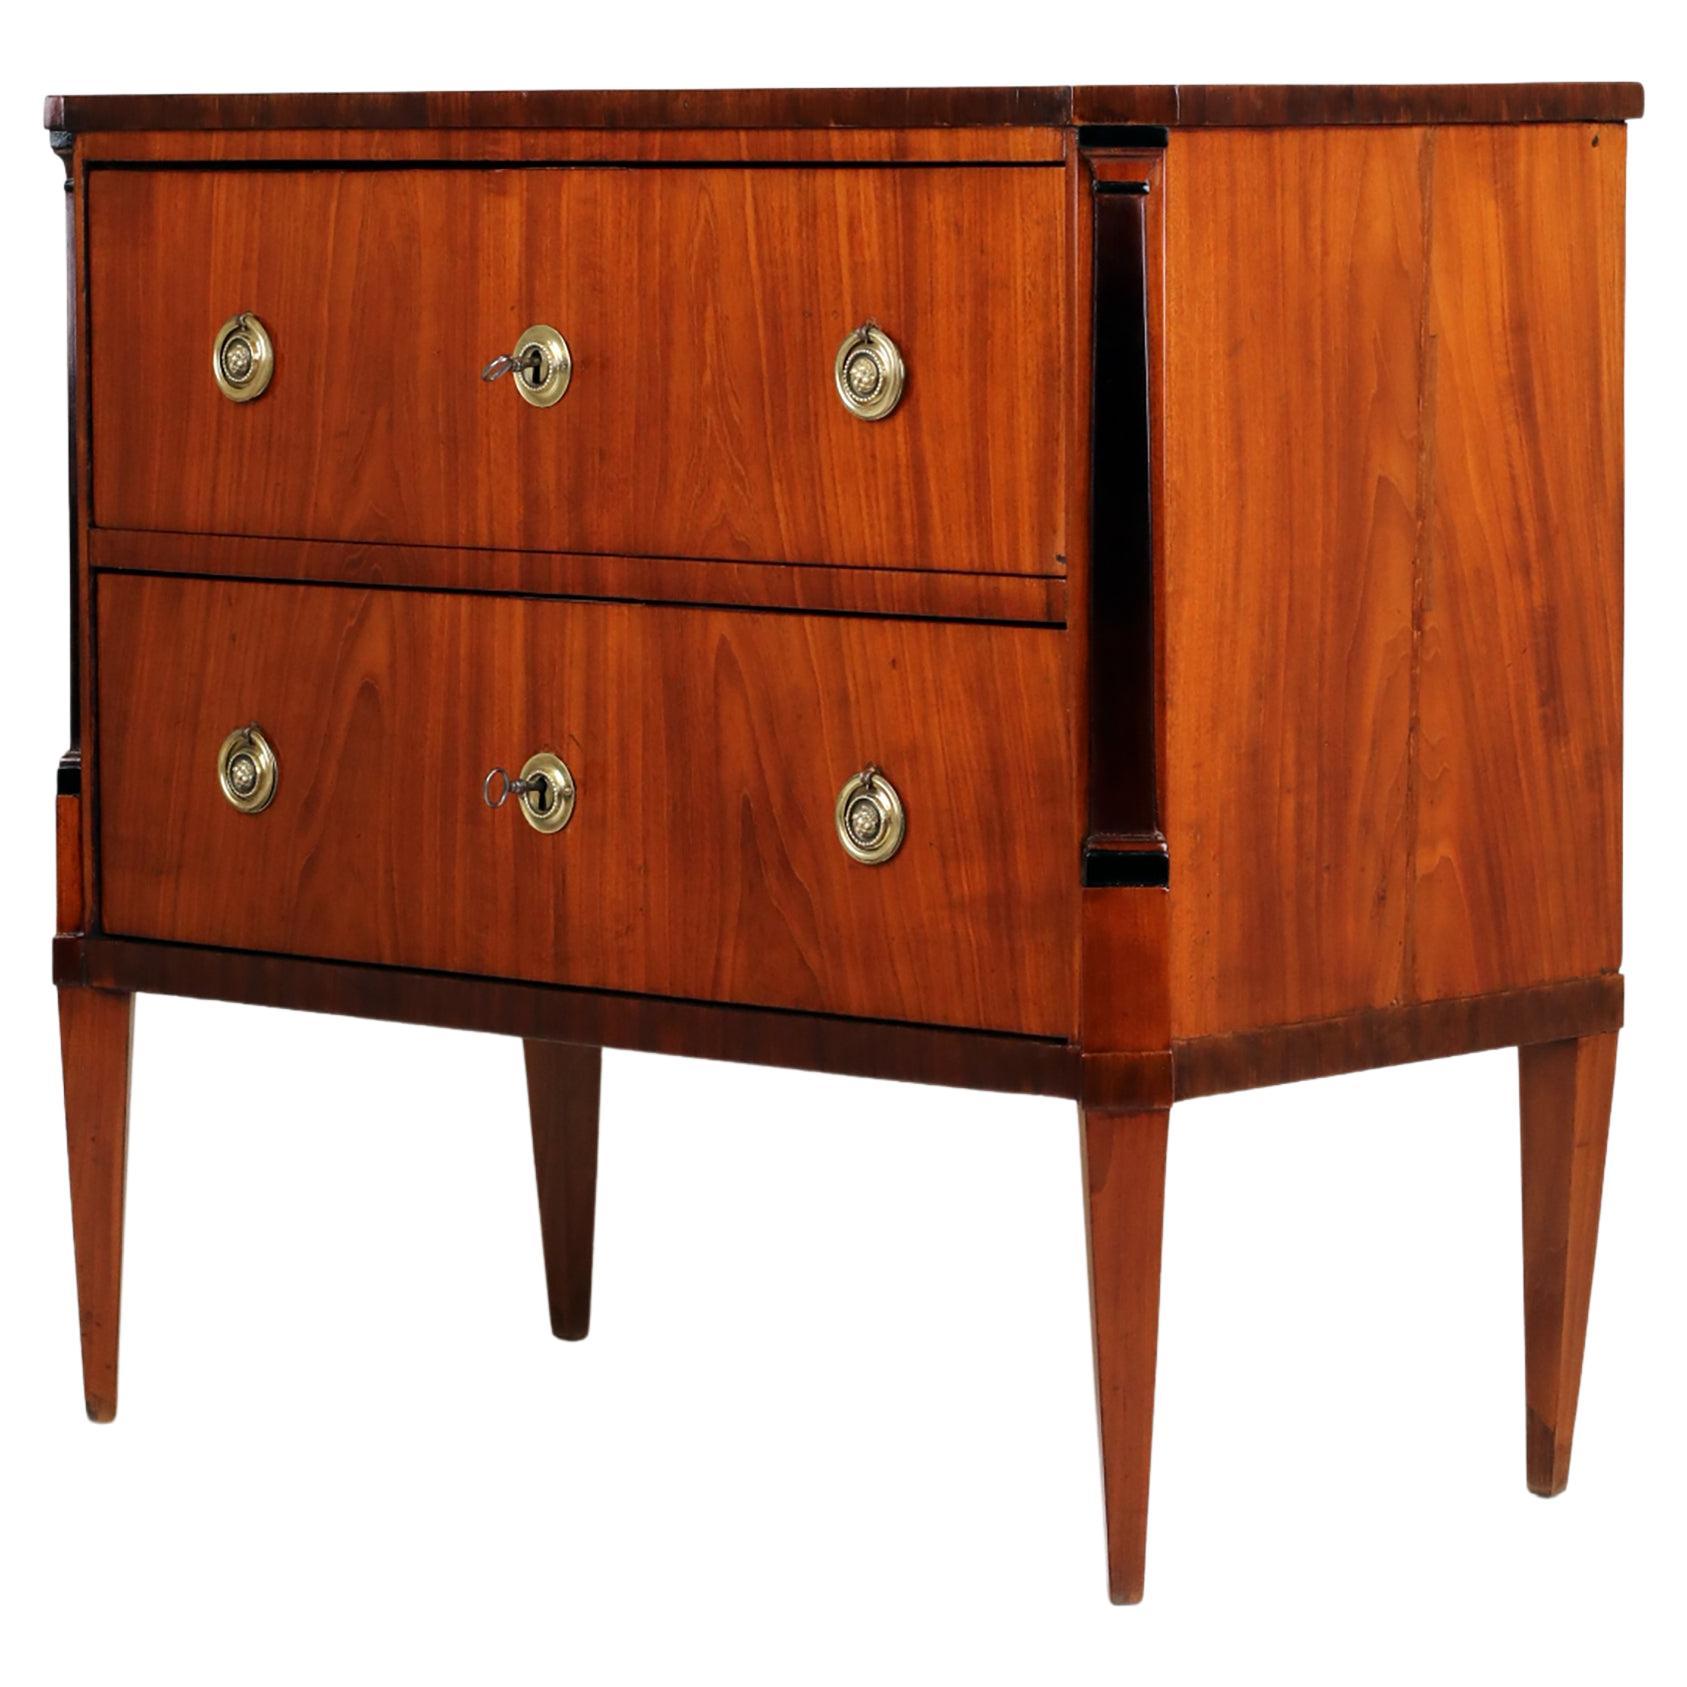 Early 19th Century Chest of Drawers
Germany, 1800
Mahogany 

Elegant Chest with two drawers standing on pointed feet. The front of the chest symmetrically veneered. Edge of the base and edge of the top with a subtly darker contrast. Ebonised